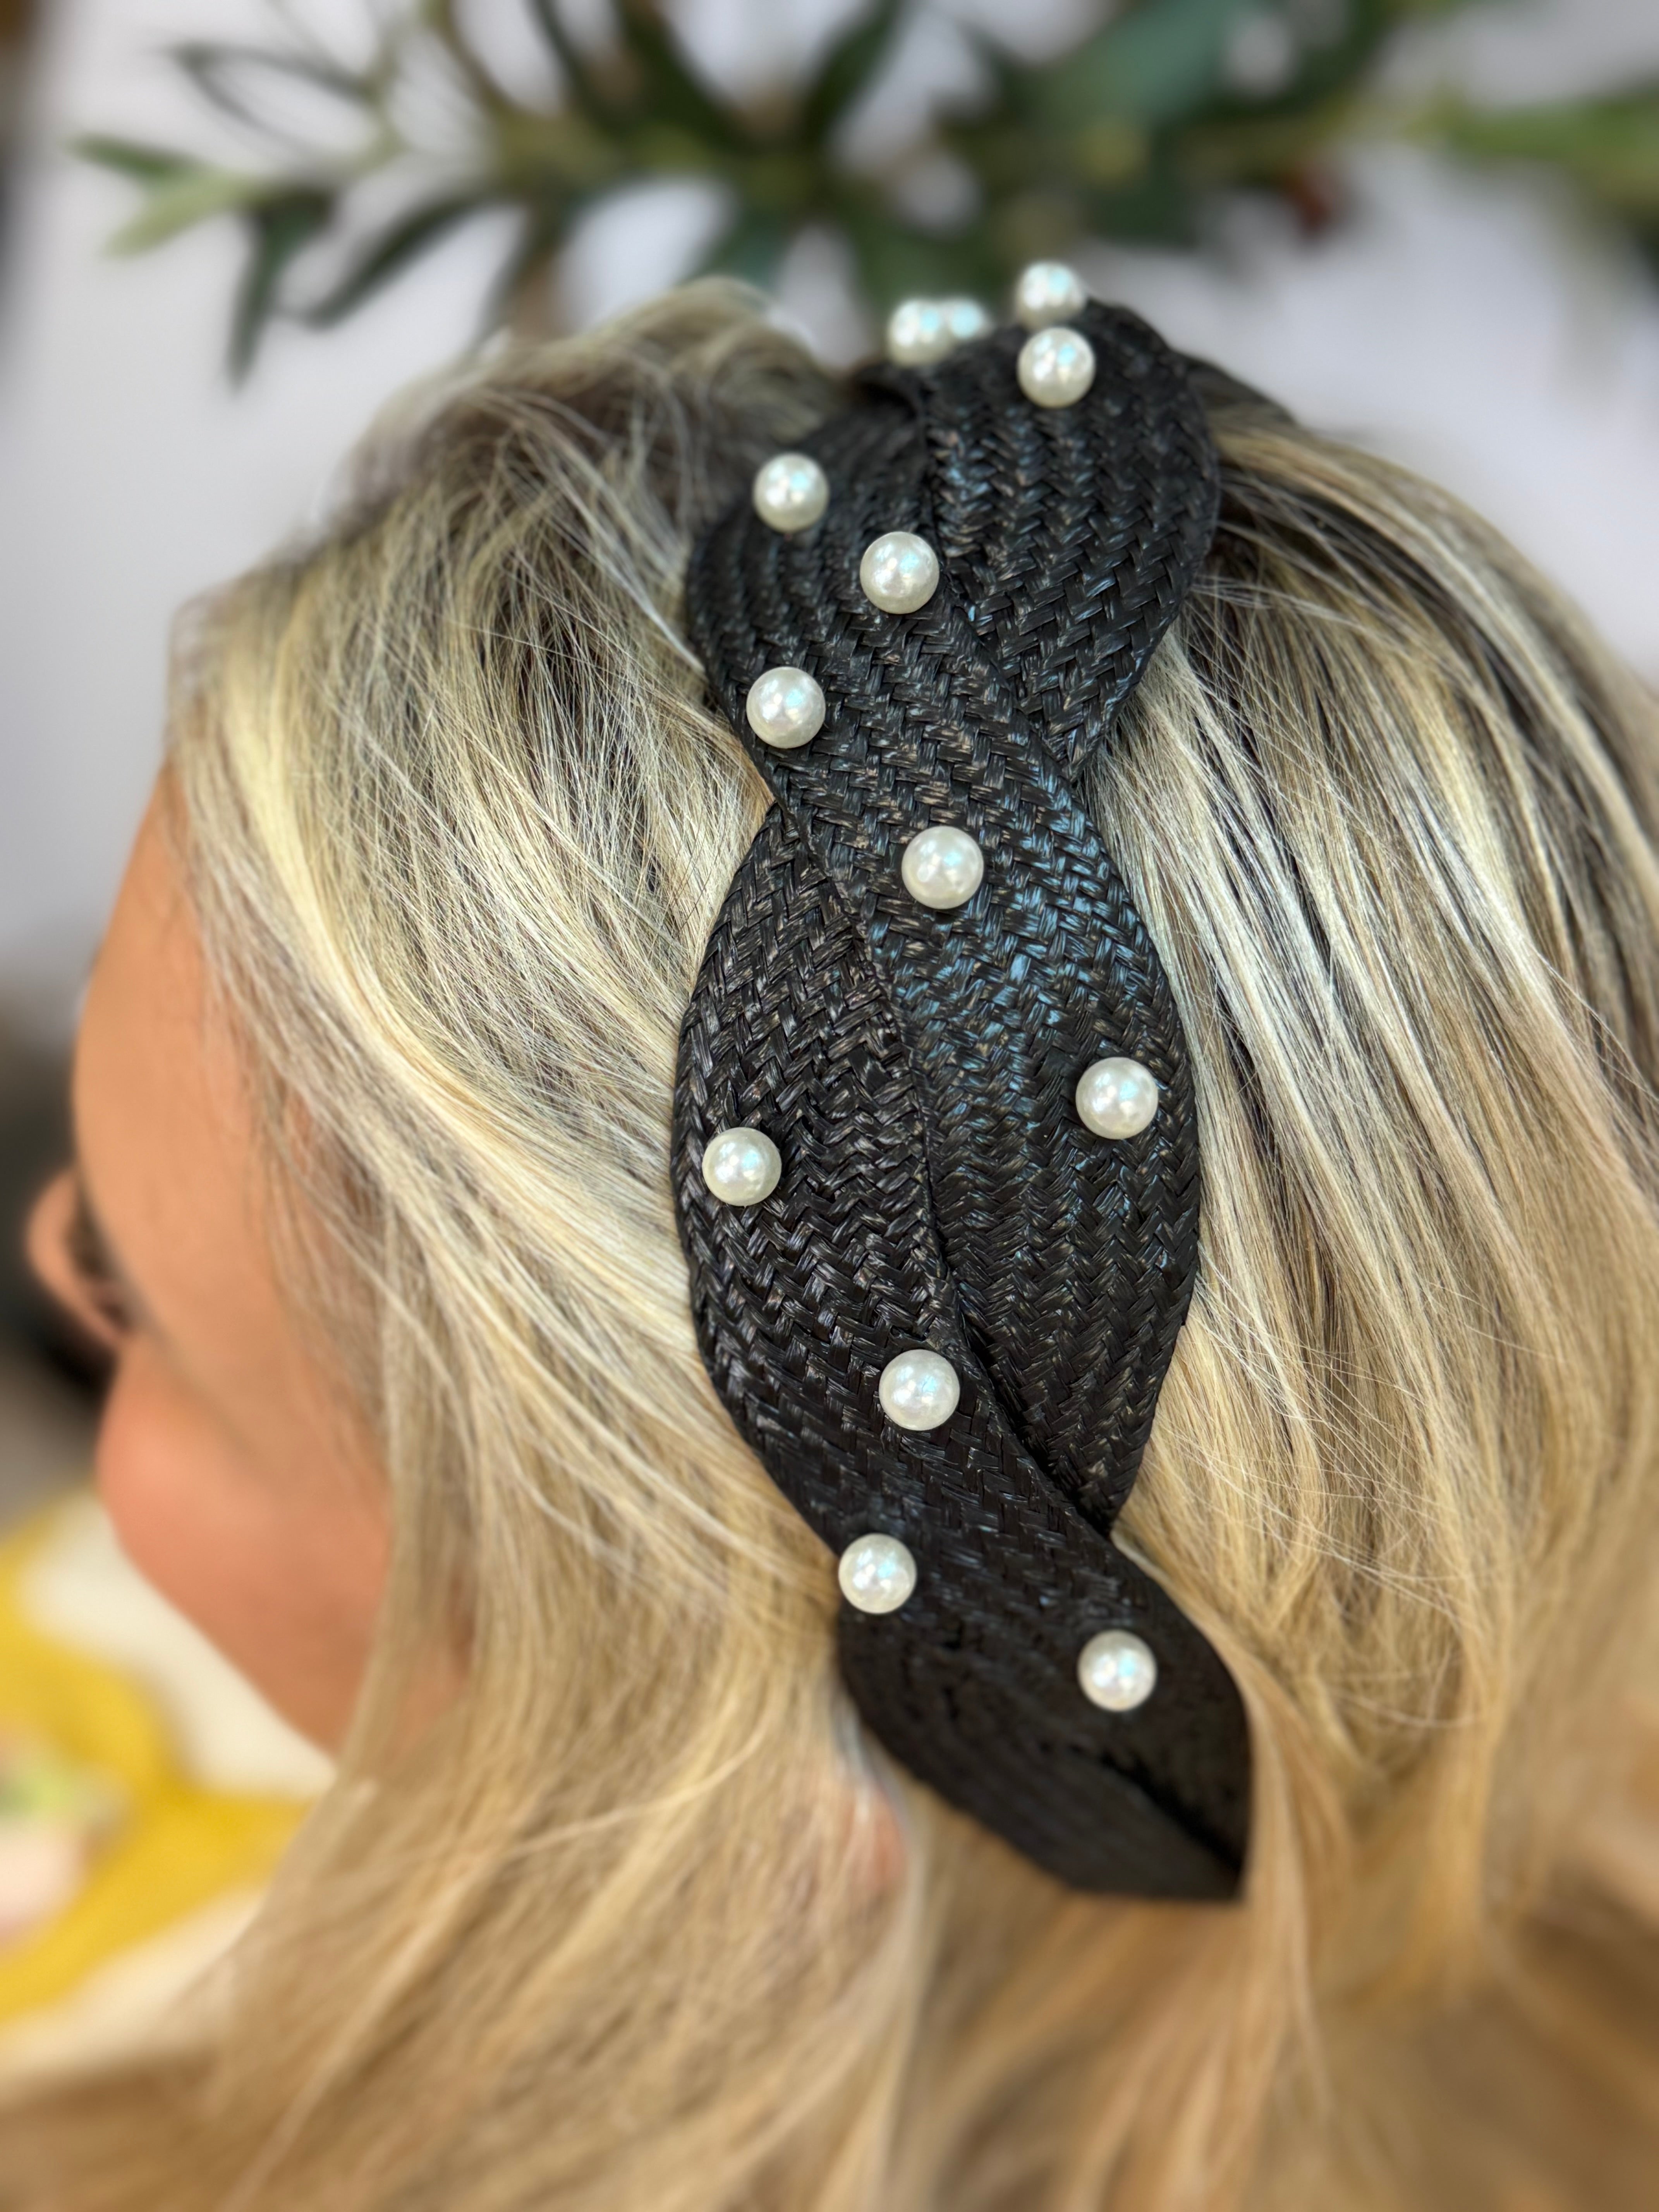 Pearls on Top Headband - Black-Headbands-The Lovely Closet-The Lovely Closet, Women's Fashion Boutique in Alexandria, KY